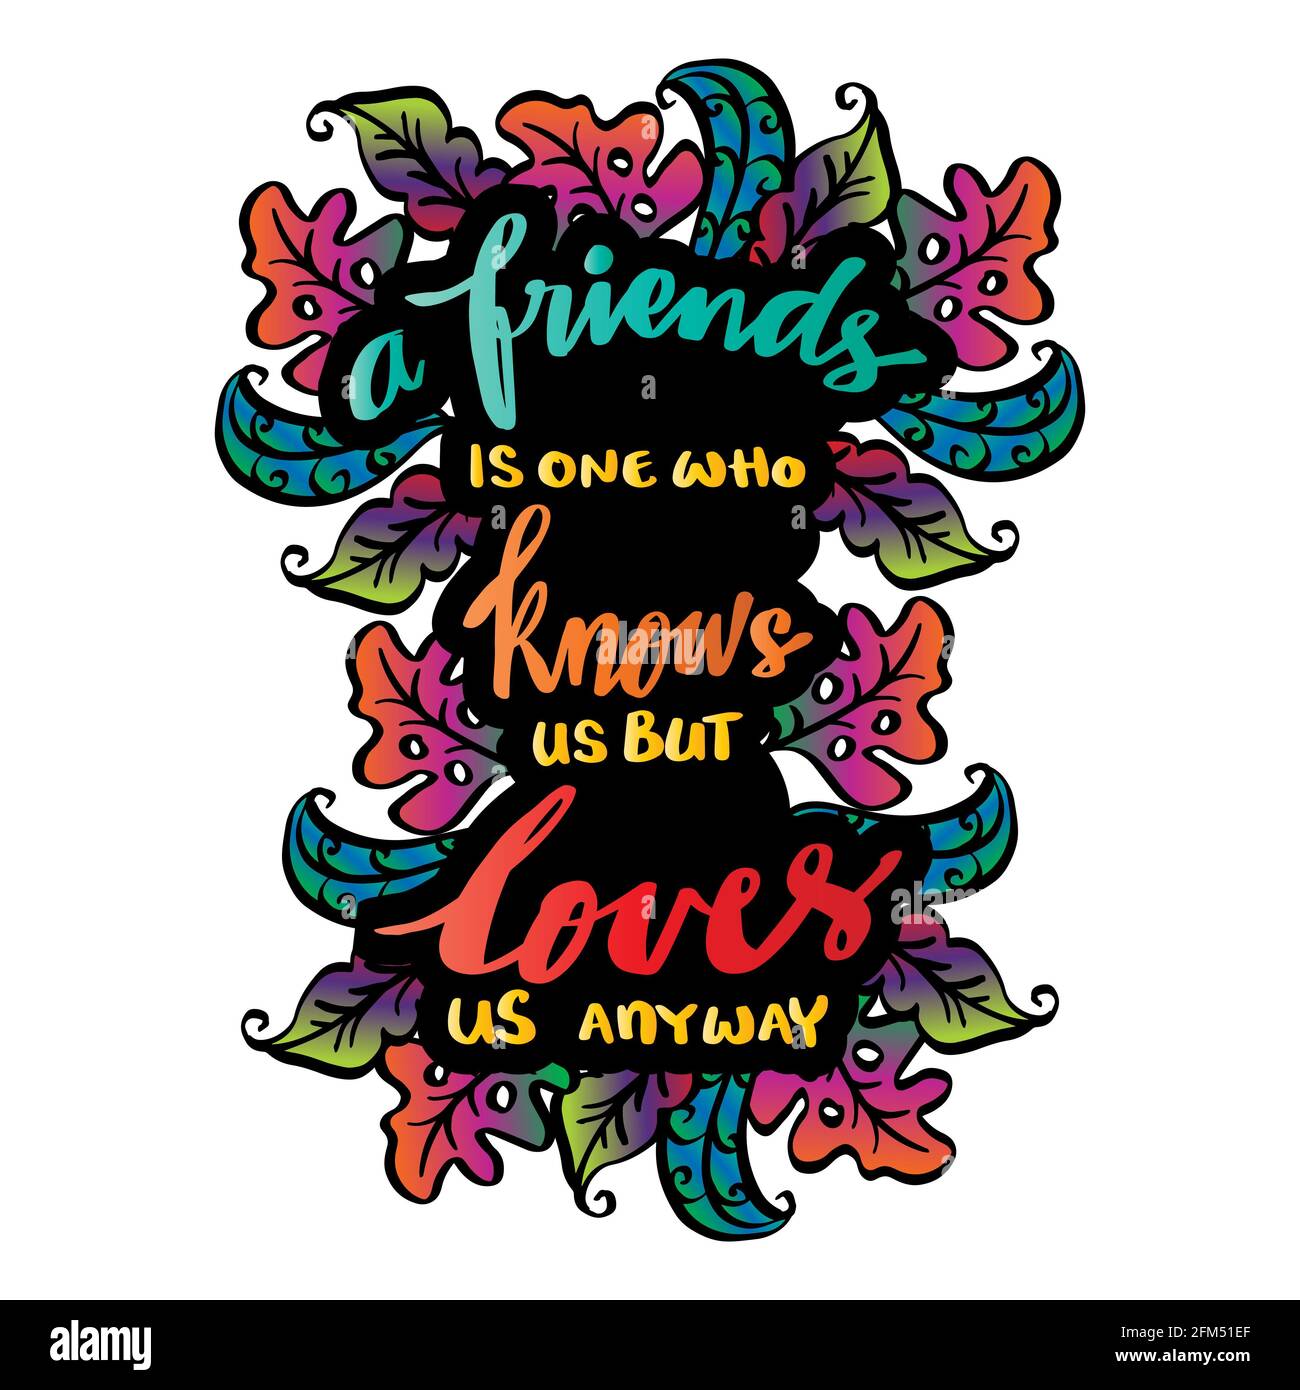 Friendship Quotes Stock Photos - 24,948 Images